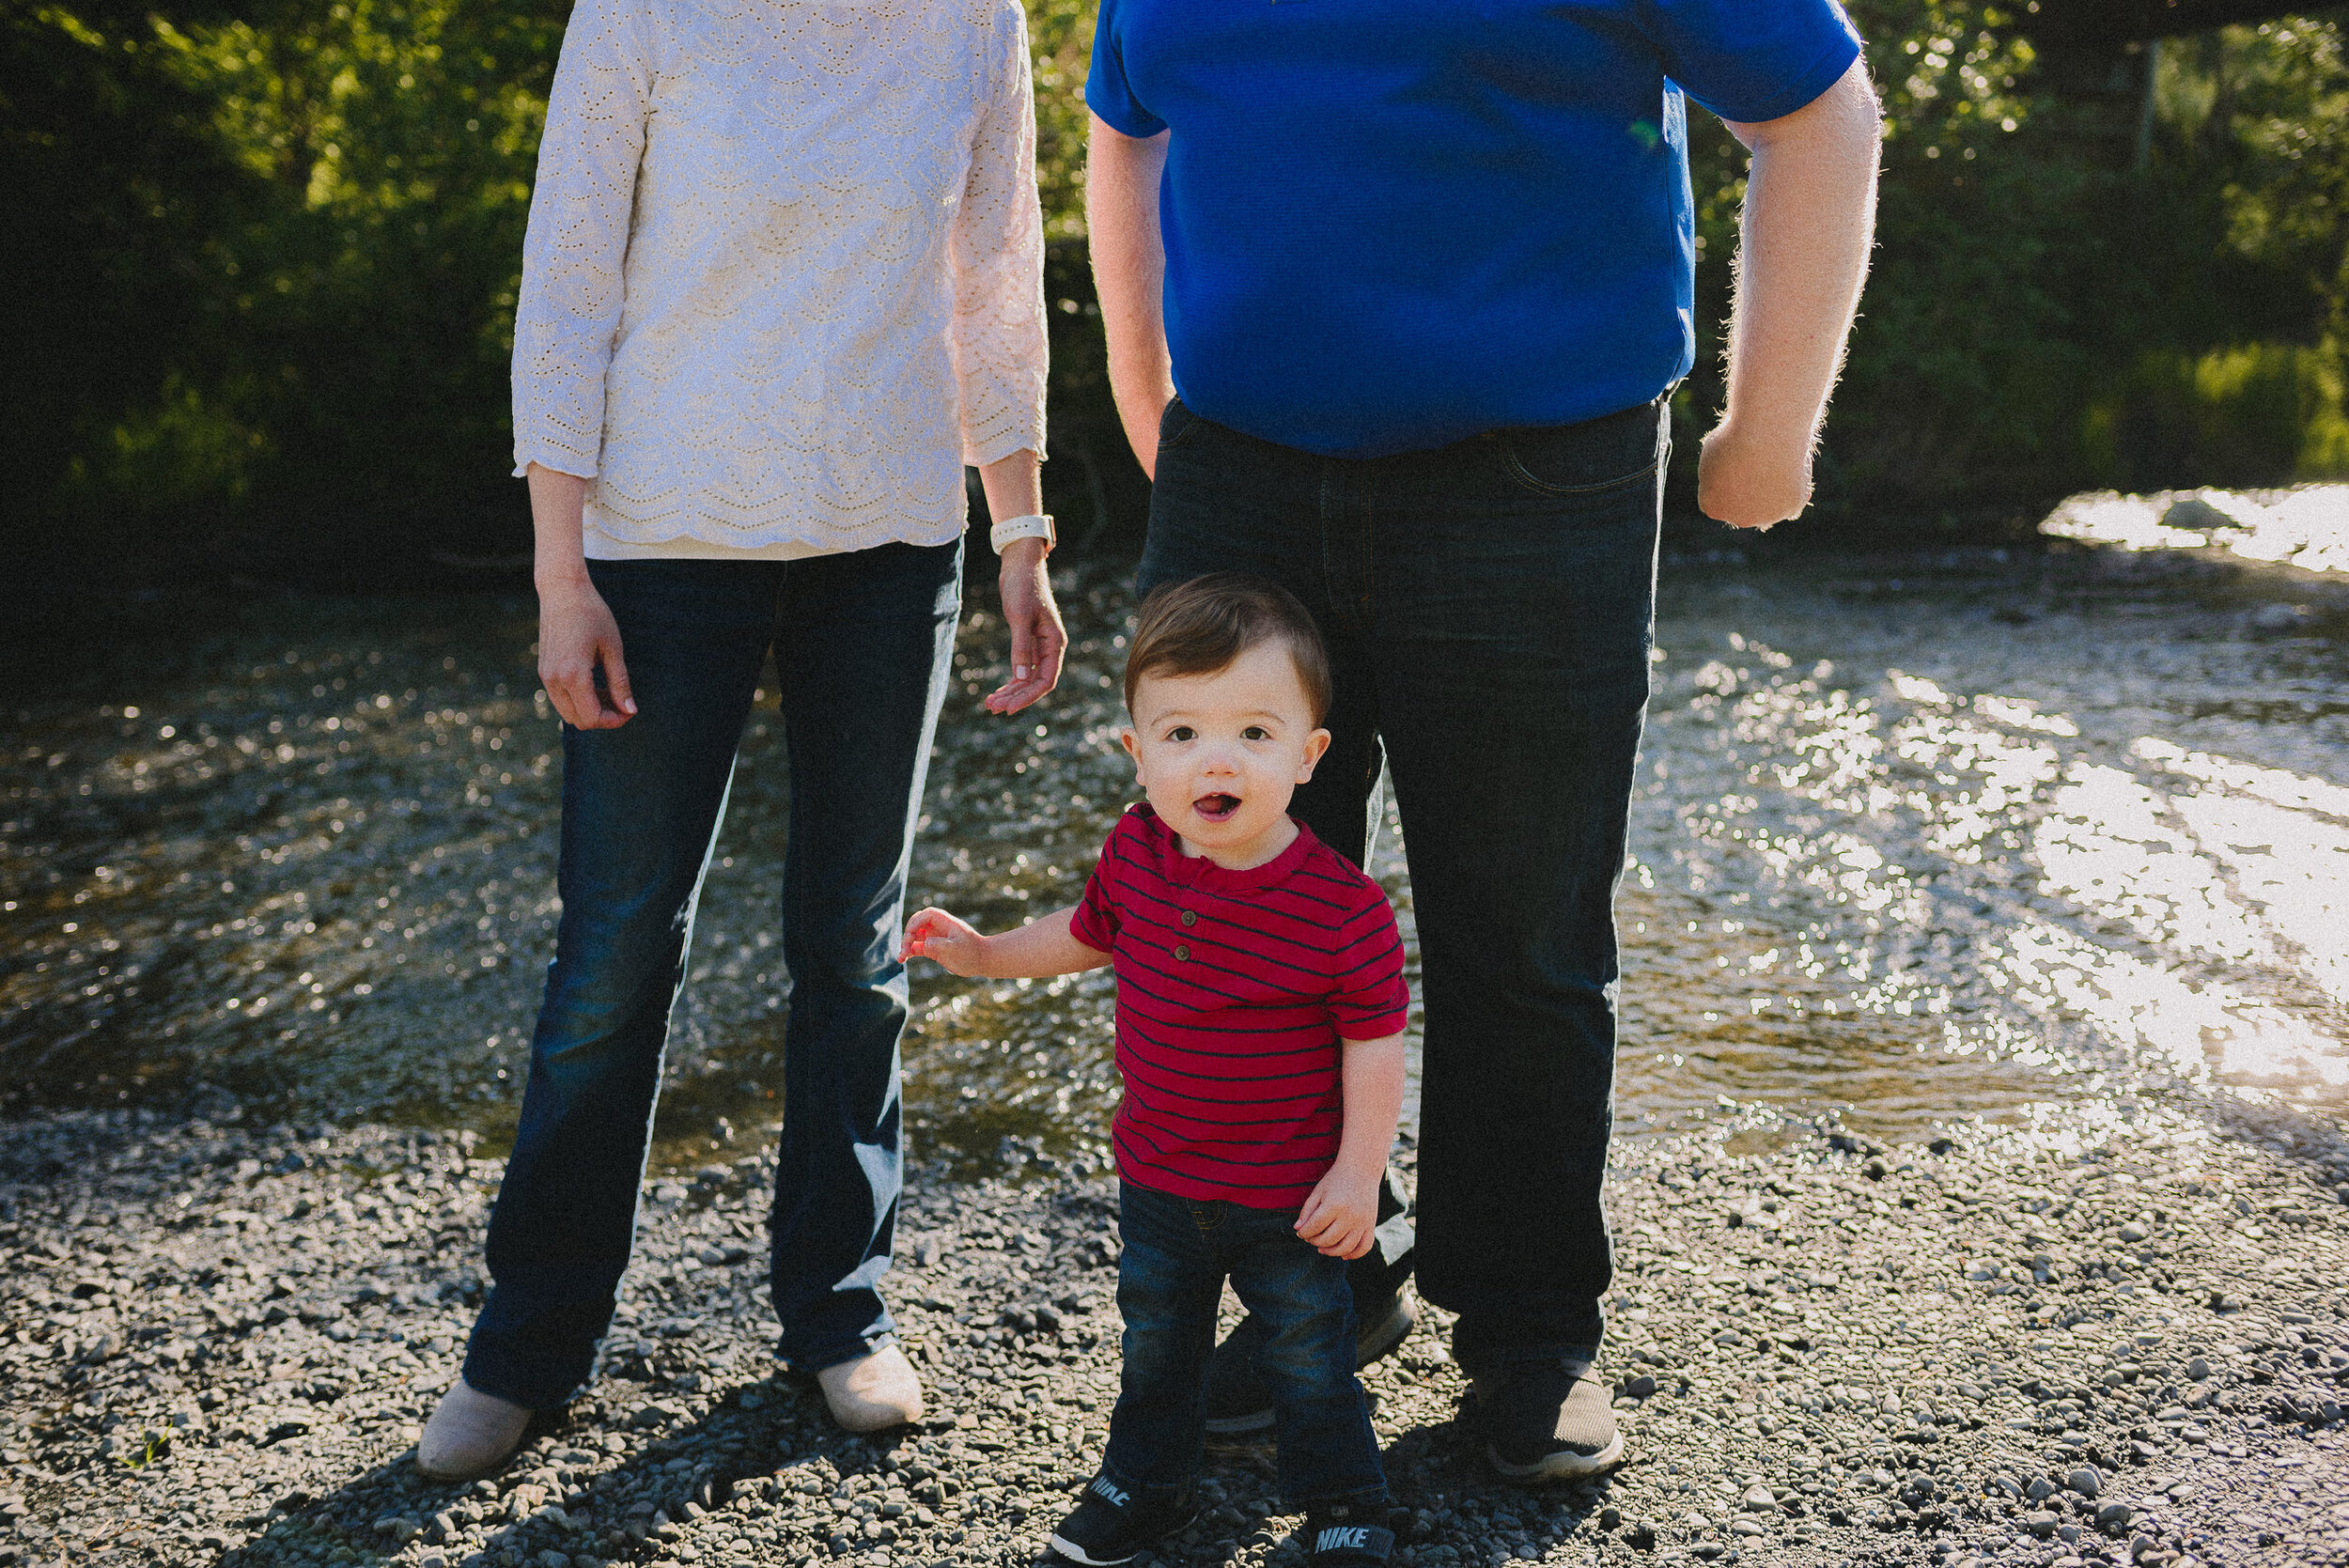 north-fork-eagle-river-family-session-alaska-photographer-way-up-north-photography (47).jpg